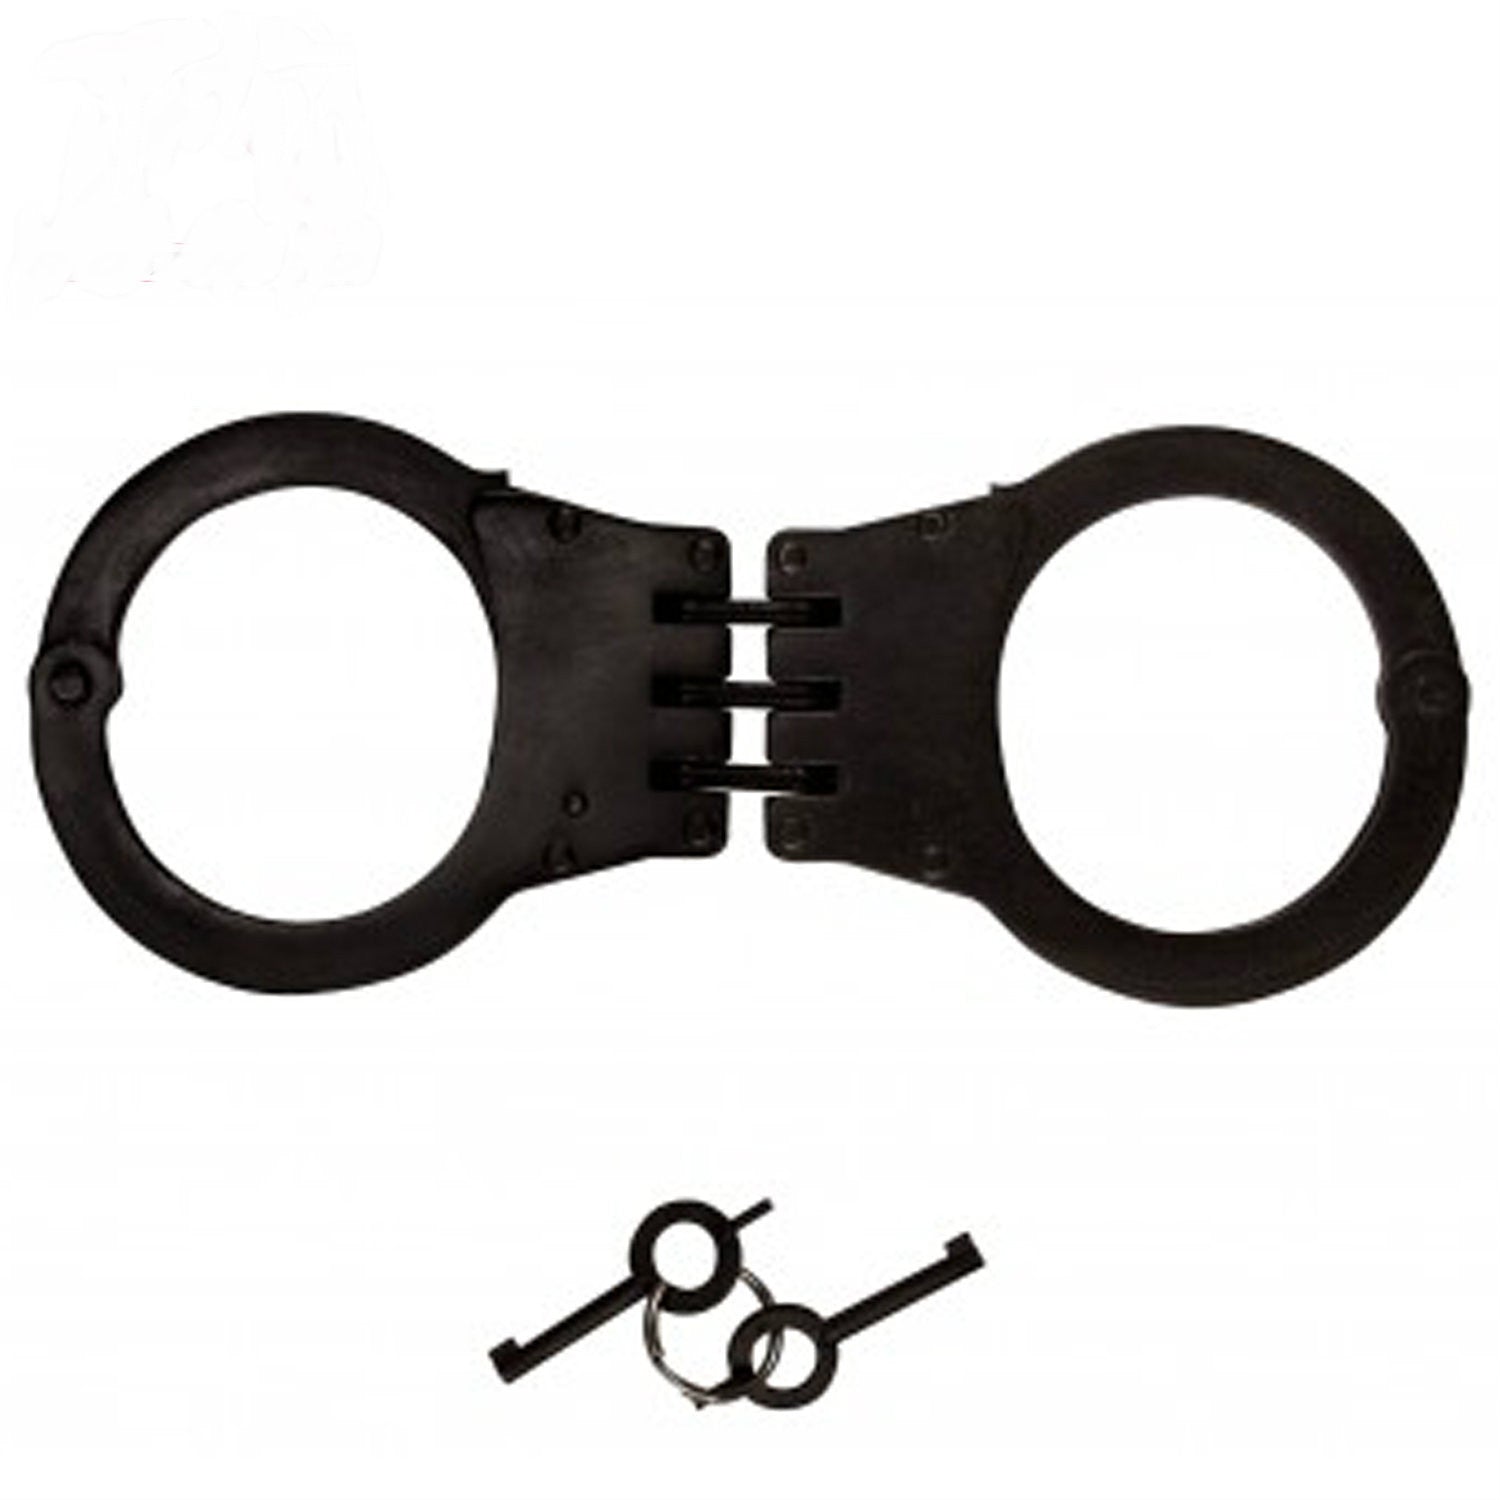 Professional Hinged Handcuffs